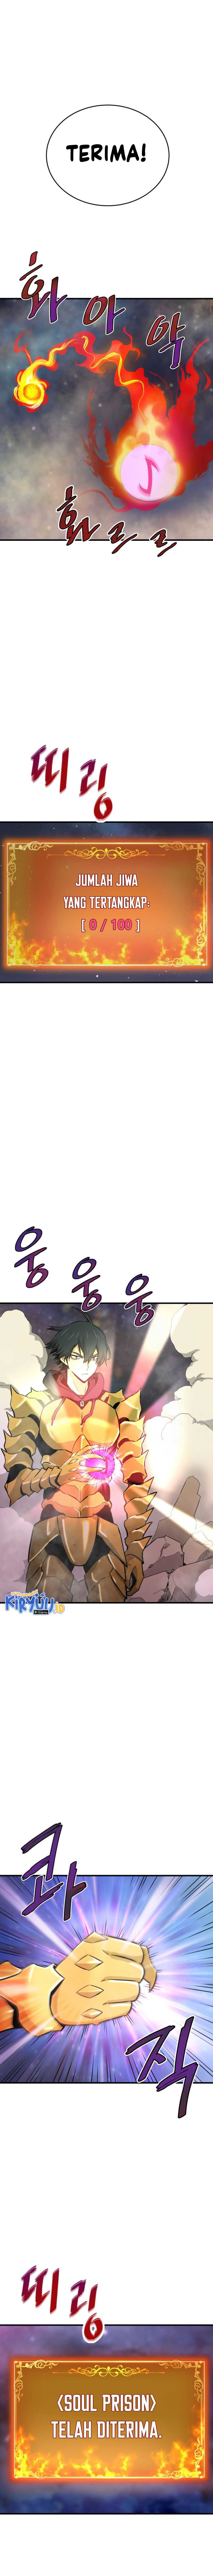 Han Dae Sung Returned From Hell Chapter 22